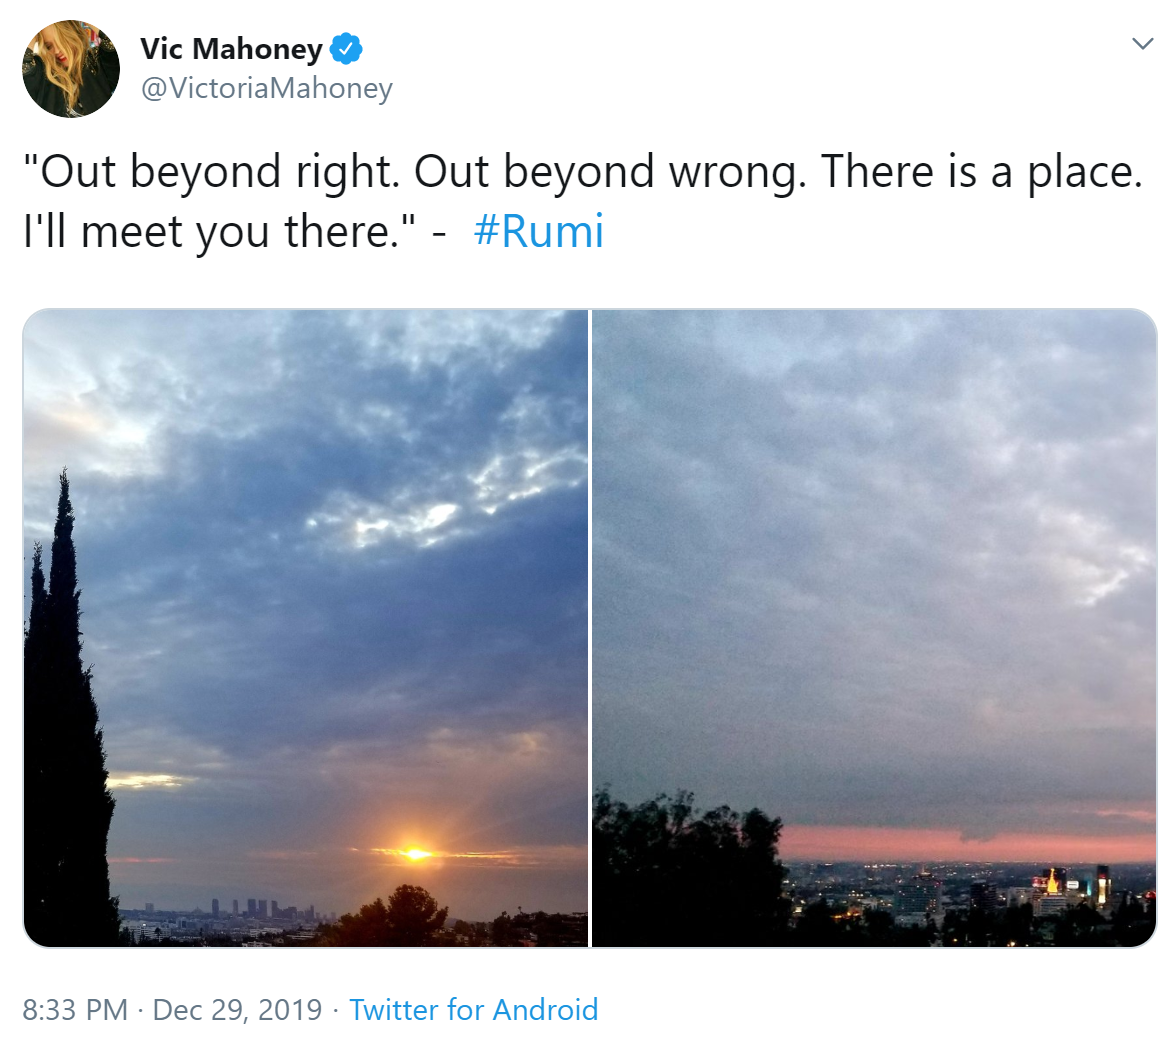 But when Vic Mahoney tweeted out the Rumi poem with the pictures of the suns, there is a sunset and sunrise. Ben will be rising. Also please read the Rumi poem and see how perfectly it represents him and Rey.